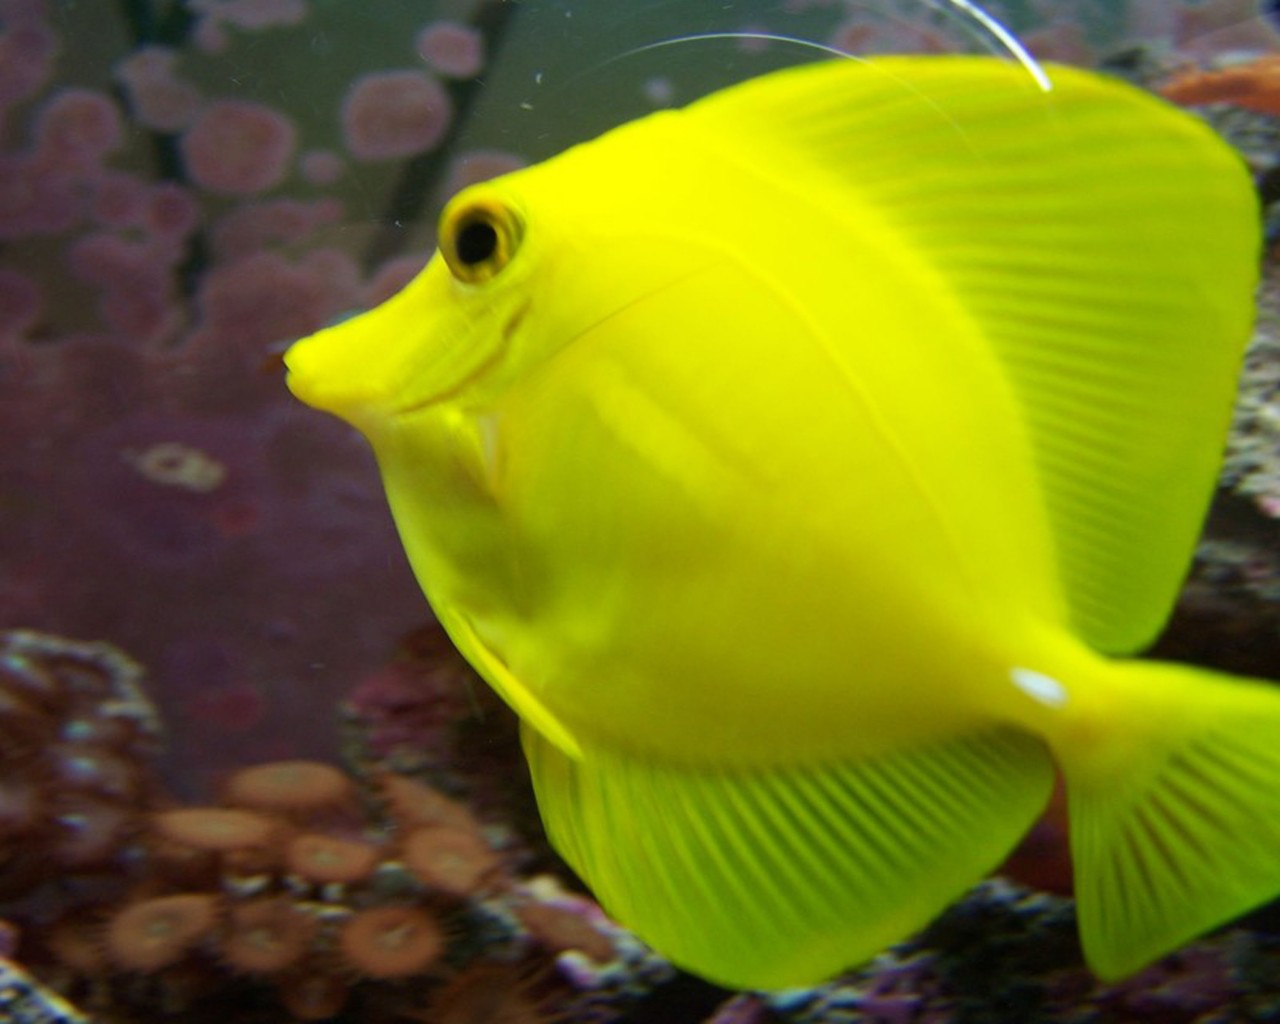 Green Saltwater Fish HD Wallpaper For Mobile Phone Laptop And Pc, Wallpaper13.com